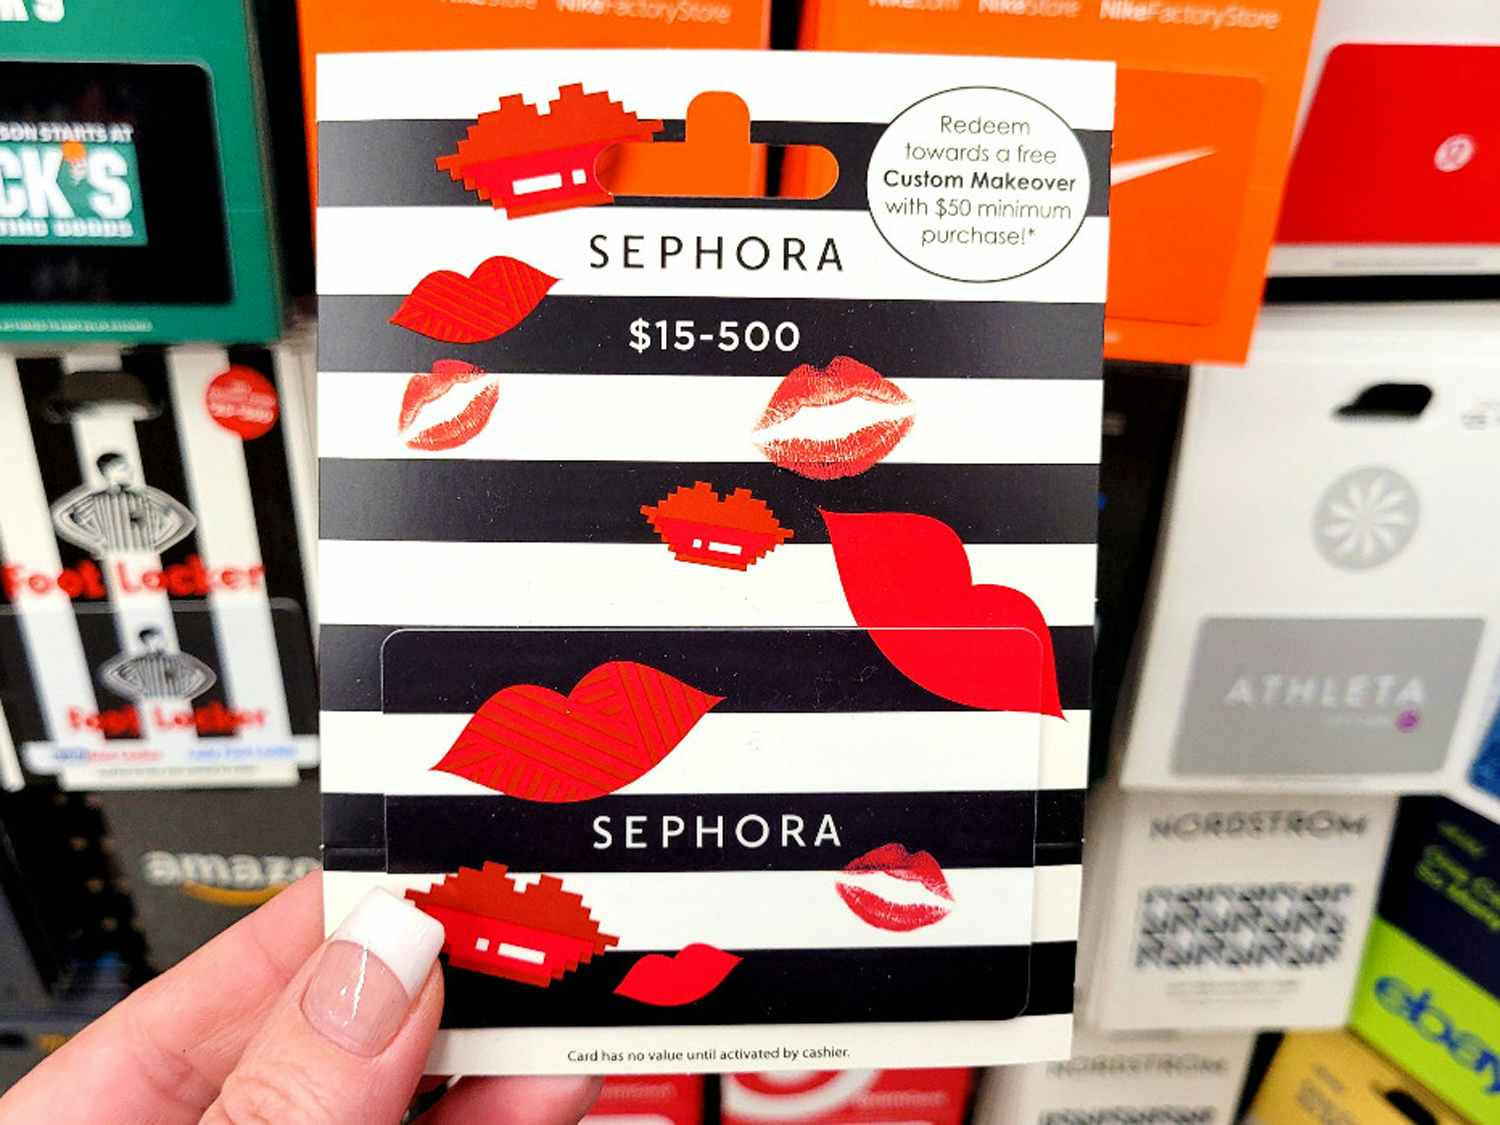 A person's hand holding a Sephora gift card in front of a display of gift cards 